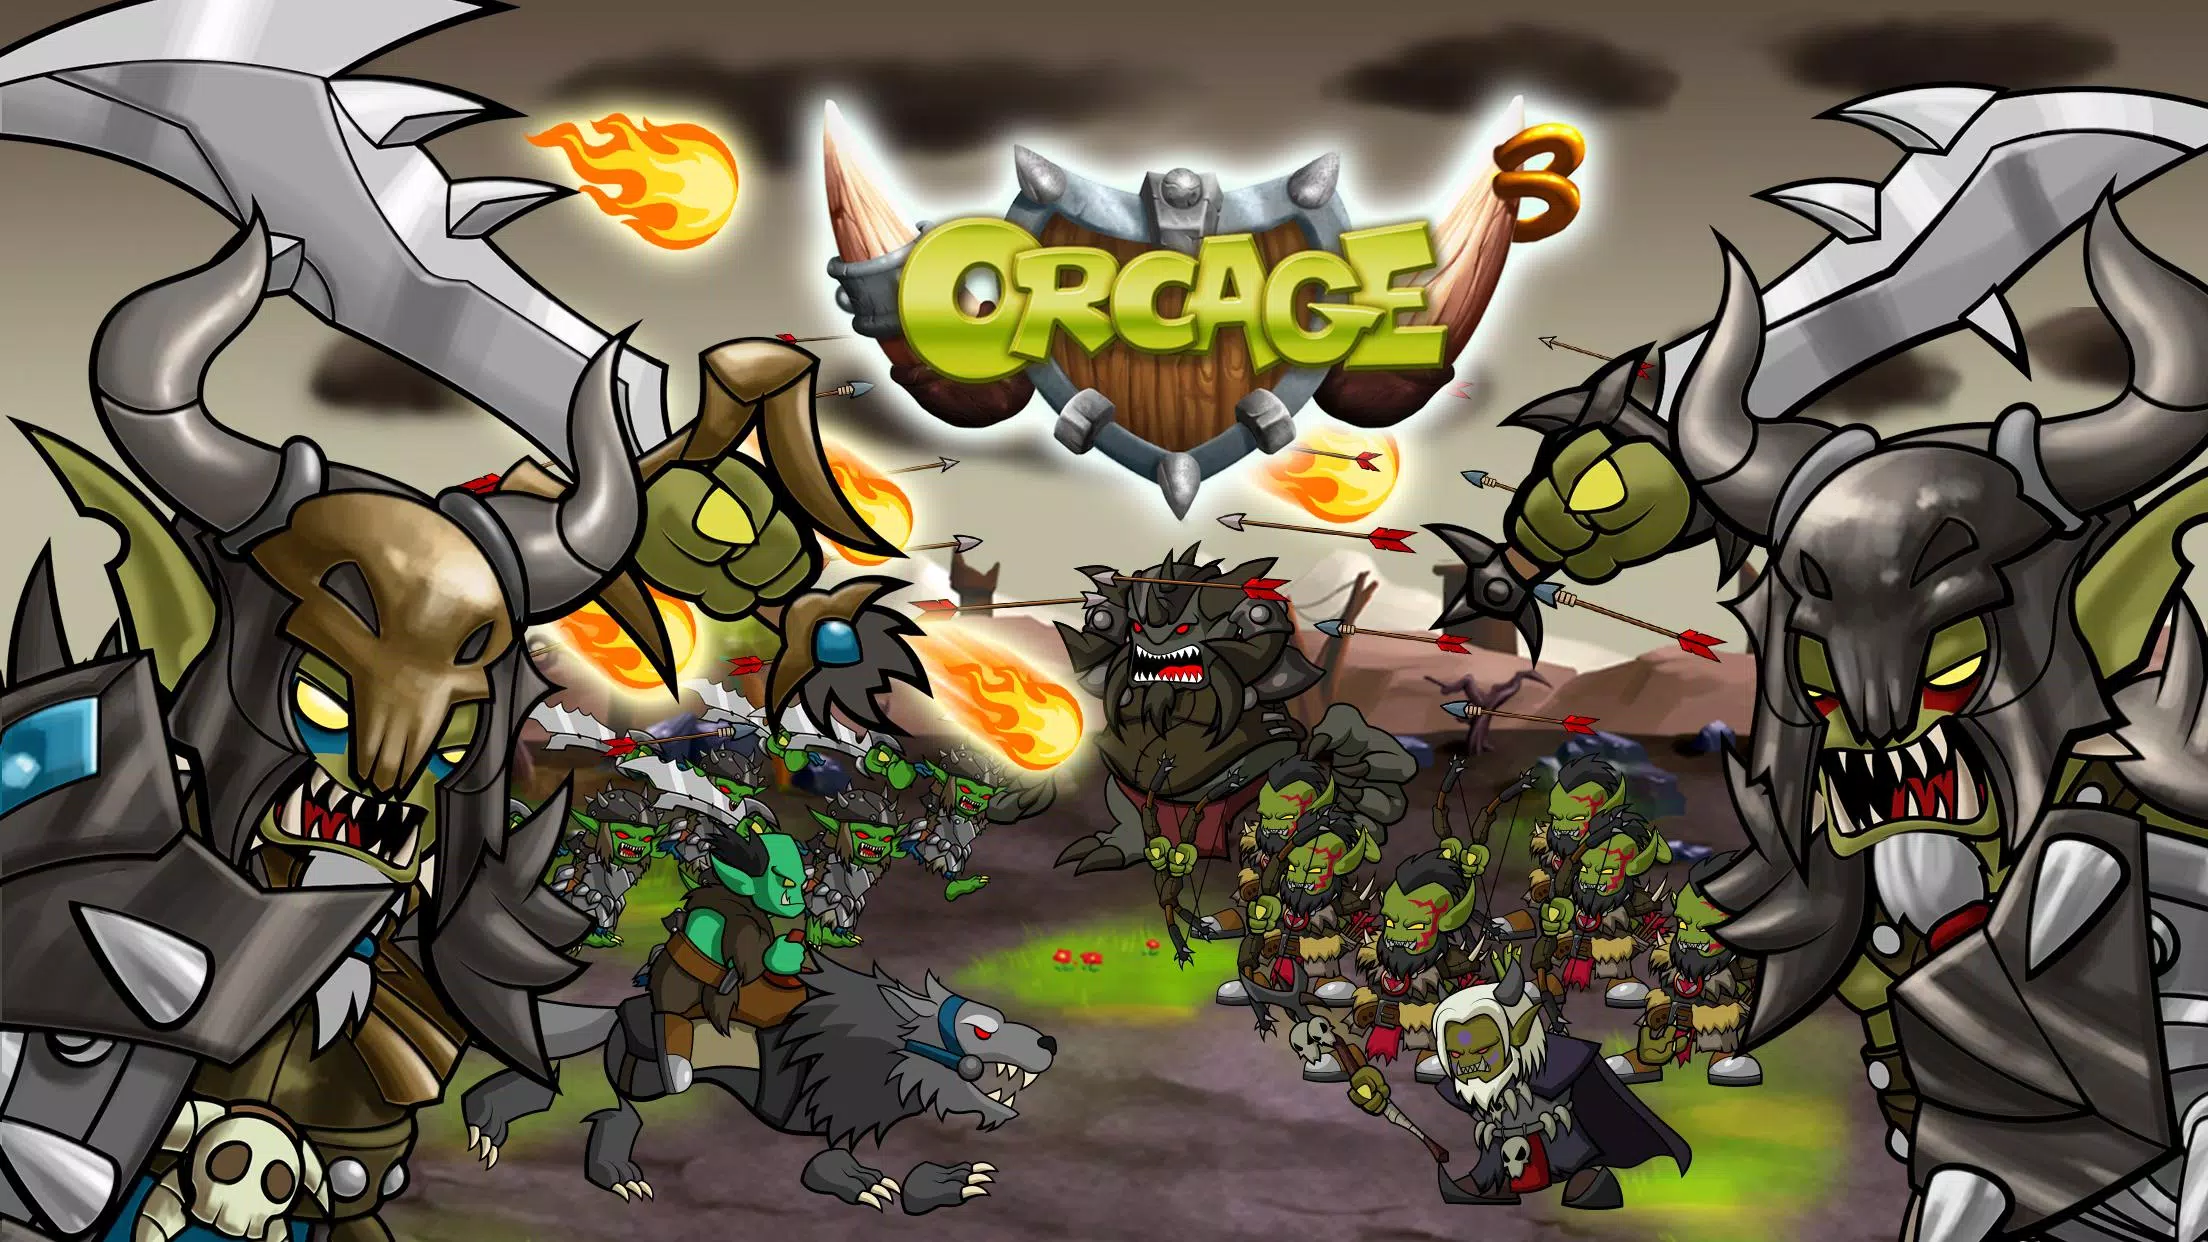 Download do APK de Guide for Dungeon Rampage para Android